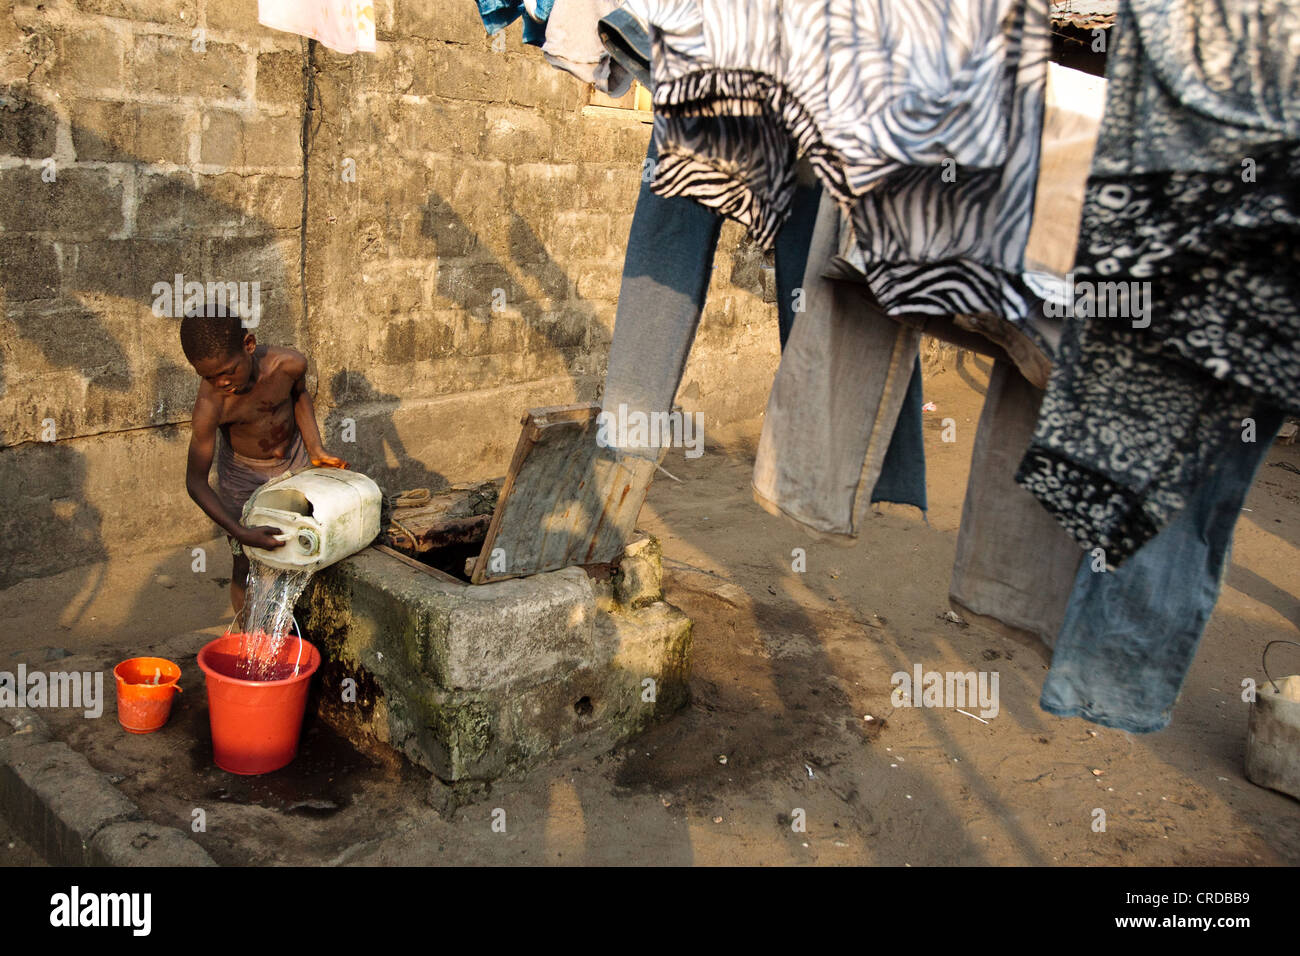 A boy draws water from a well in the West Point slum in Monrovia, Montserrado county, Liberia on Monday April 2, 2012. Stock Photo